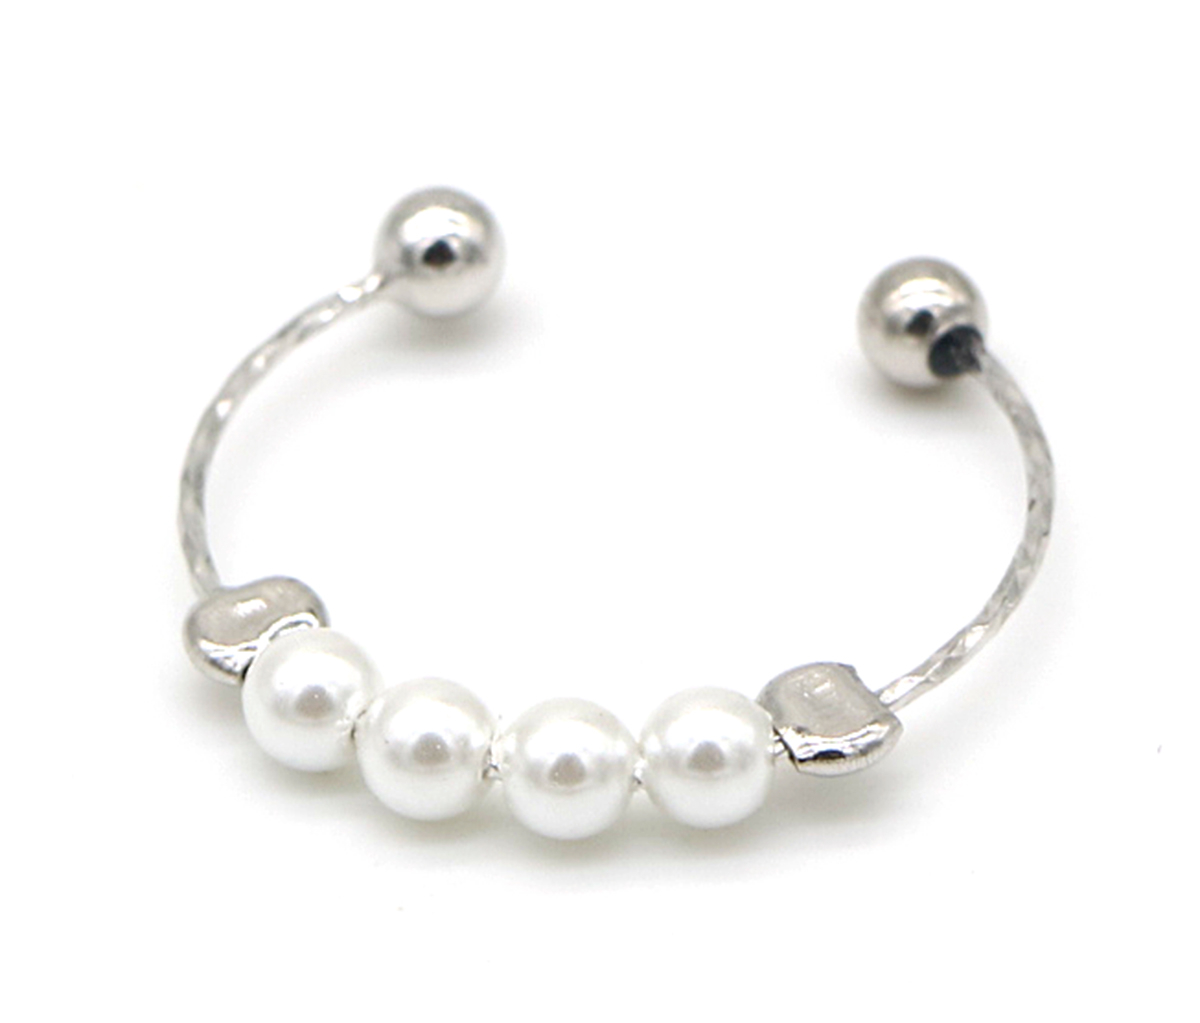 J-B6.2 S104-162 925S Silver Ring with Pearls Adjustable